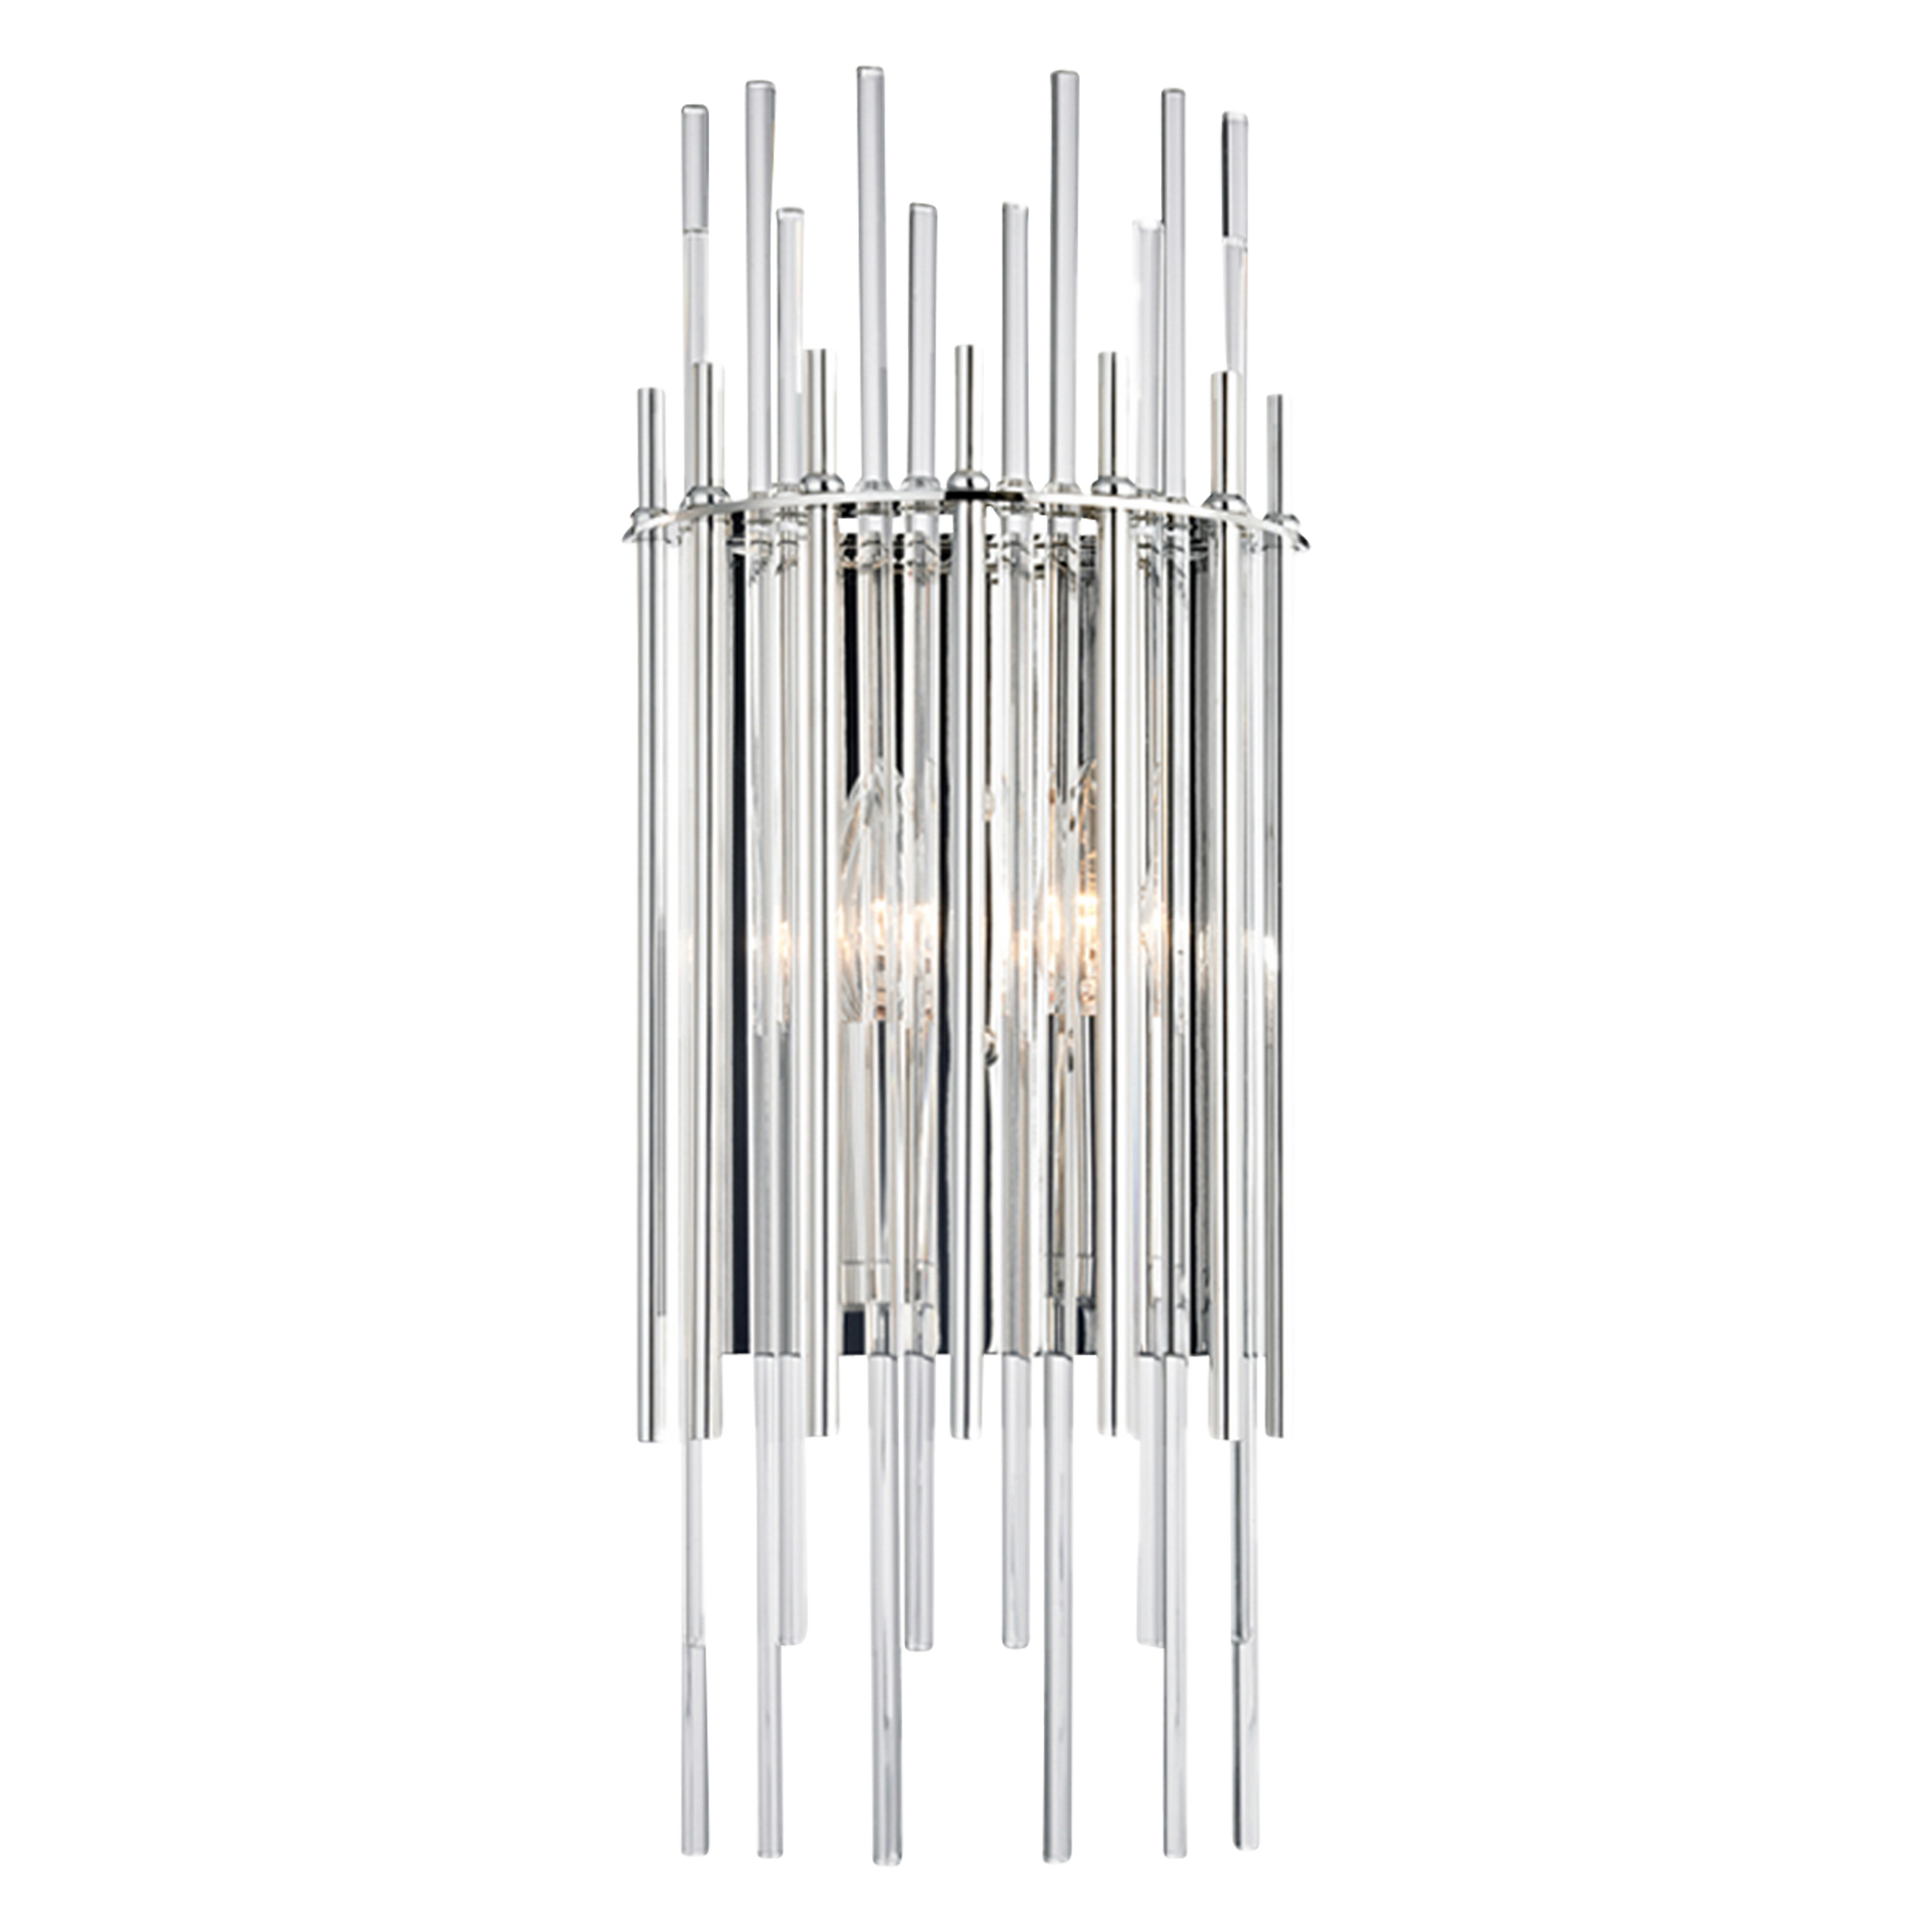 Layered glass and metal rods at staggered lengths in a classic half drum shape make the Wallis light feel both contemporary and familiar.